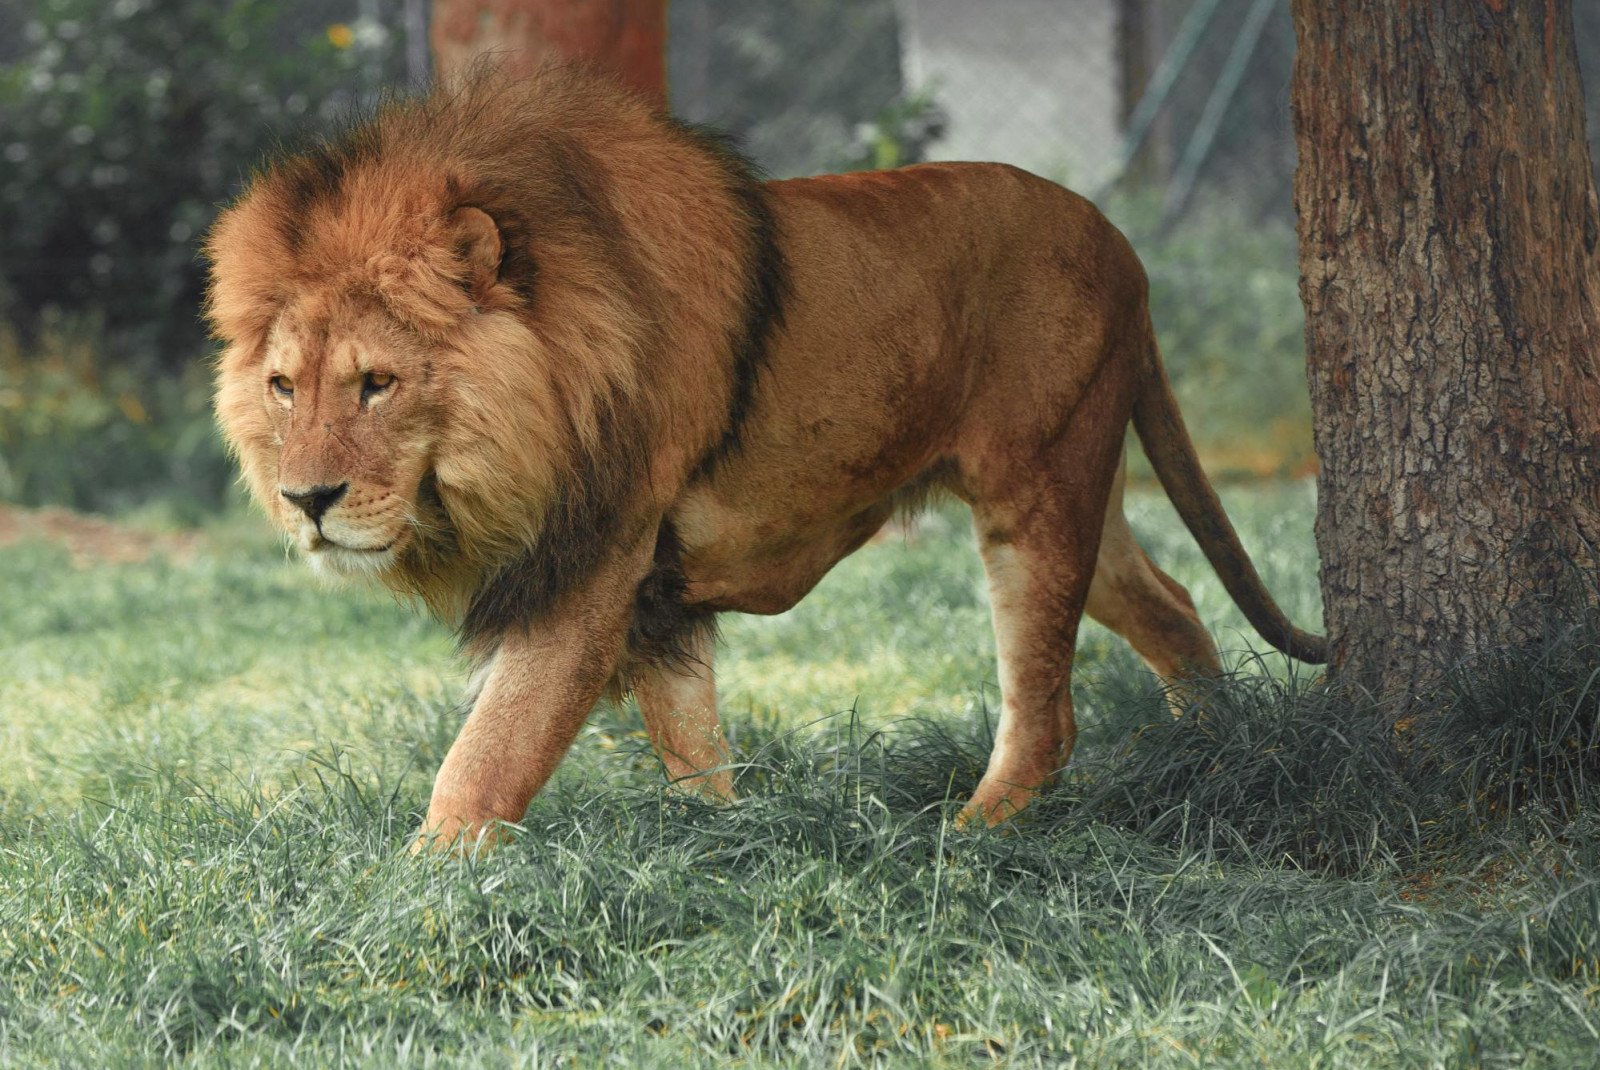 Male lion with long mane walking in grass on sunny day.